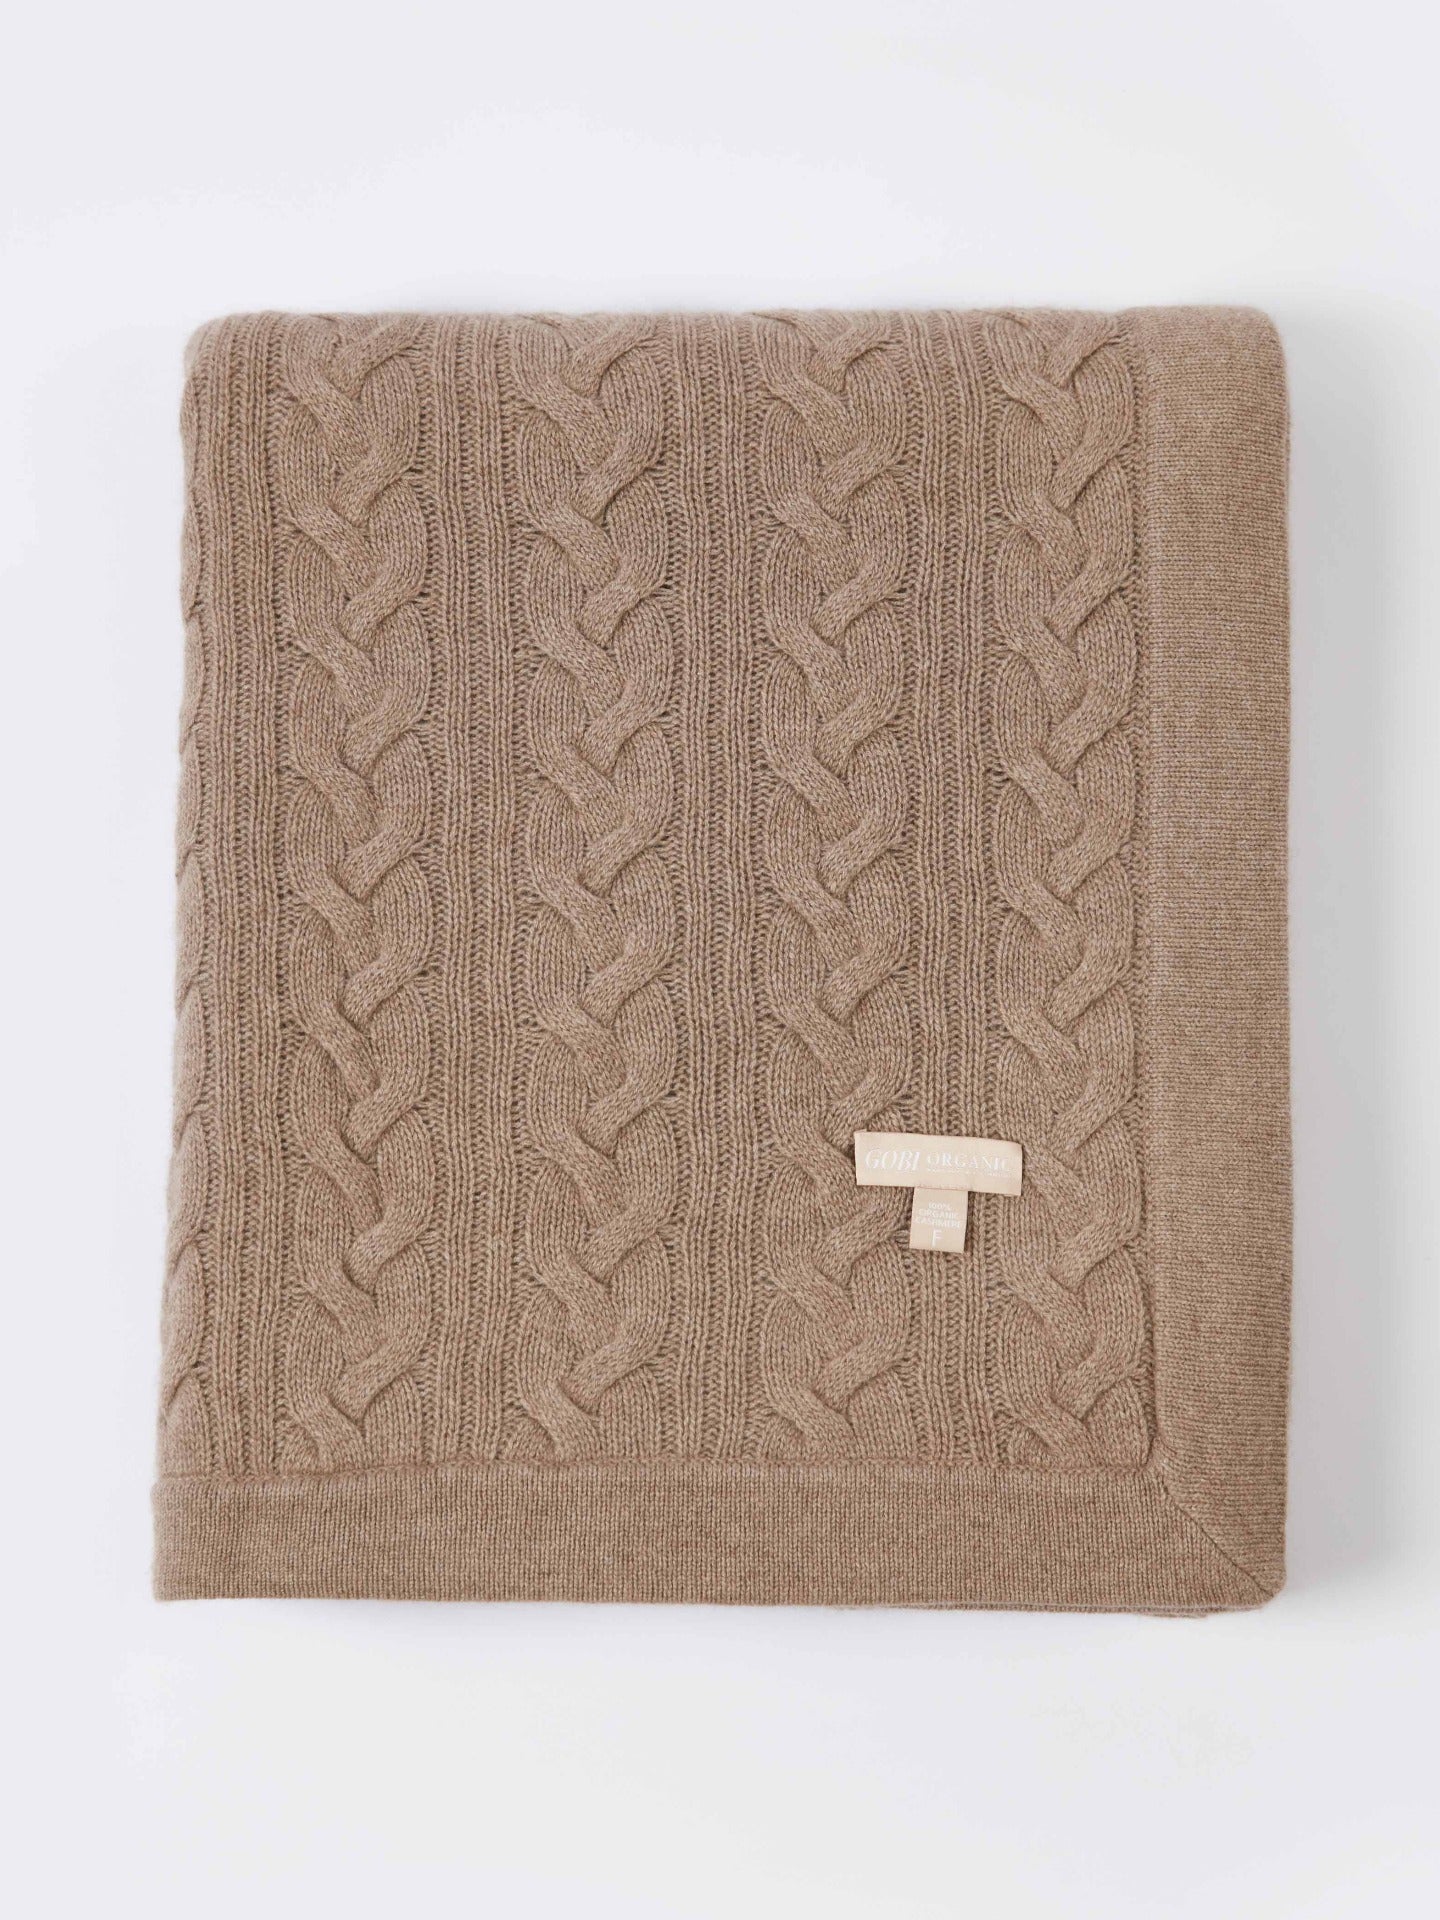 Unisex Cashmere Cable Knit Blanket Taupe - Gobi Cashmere